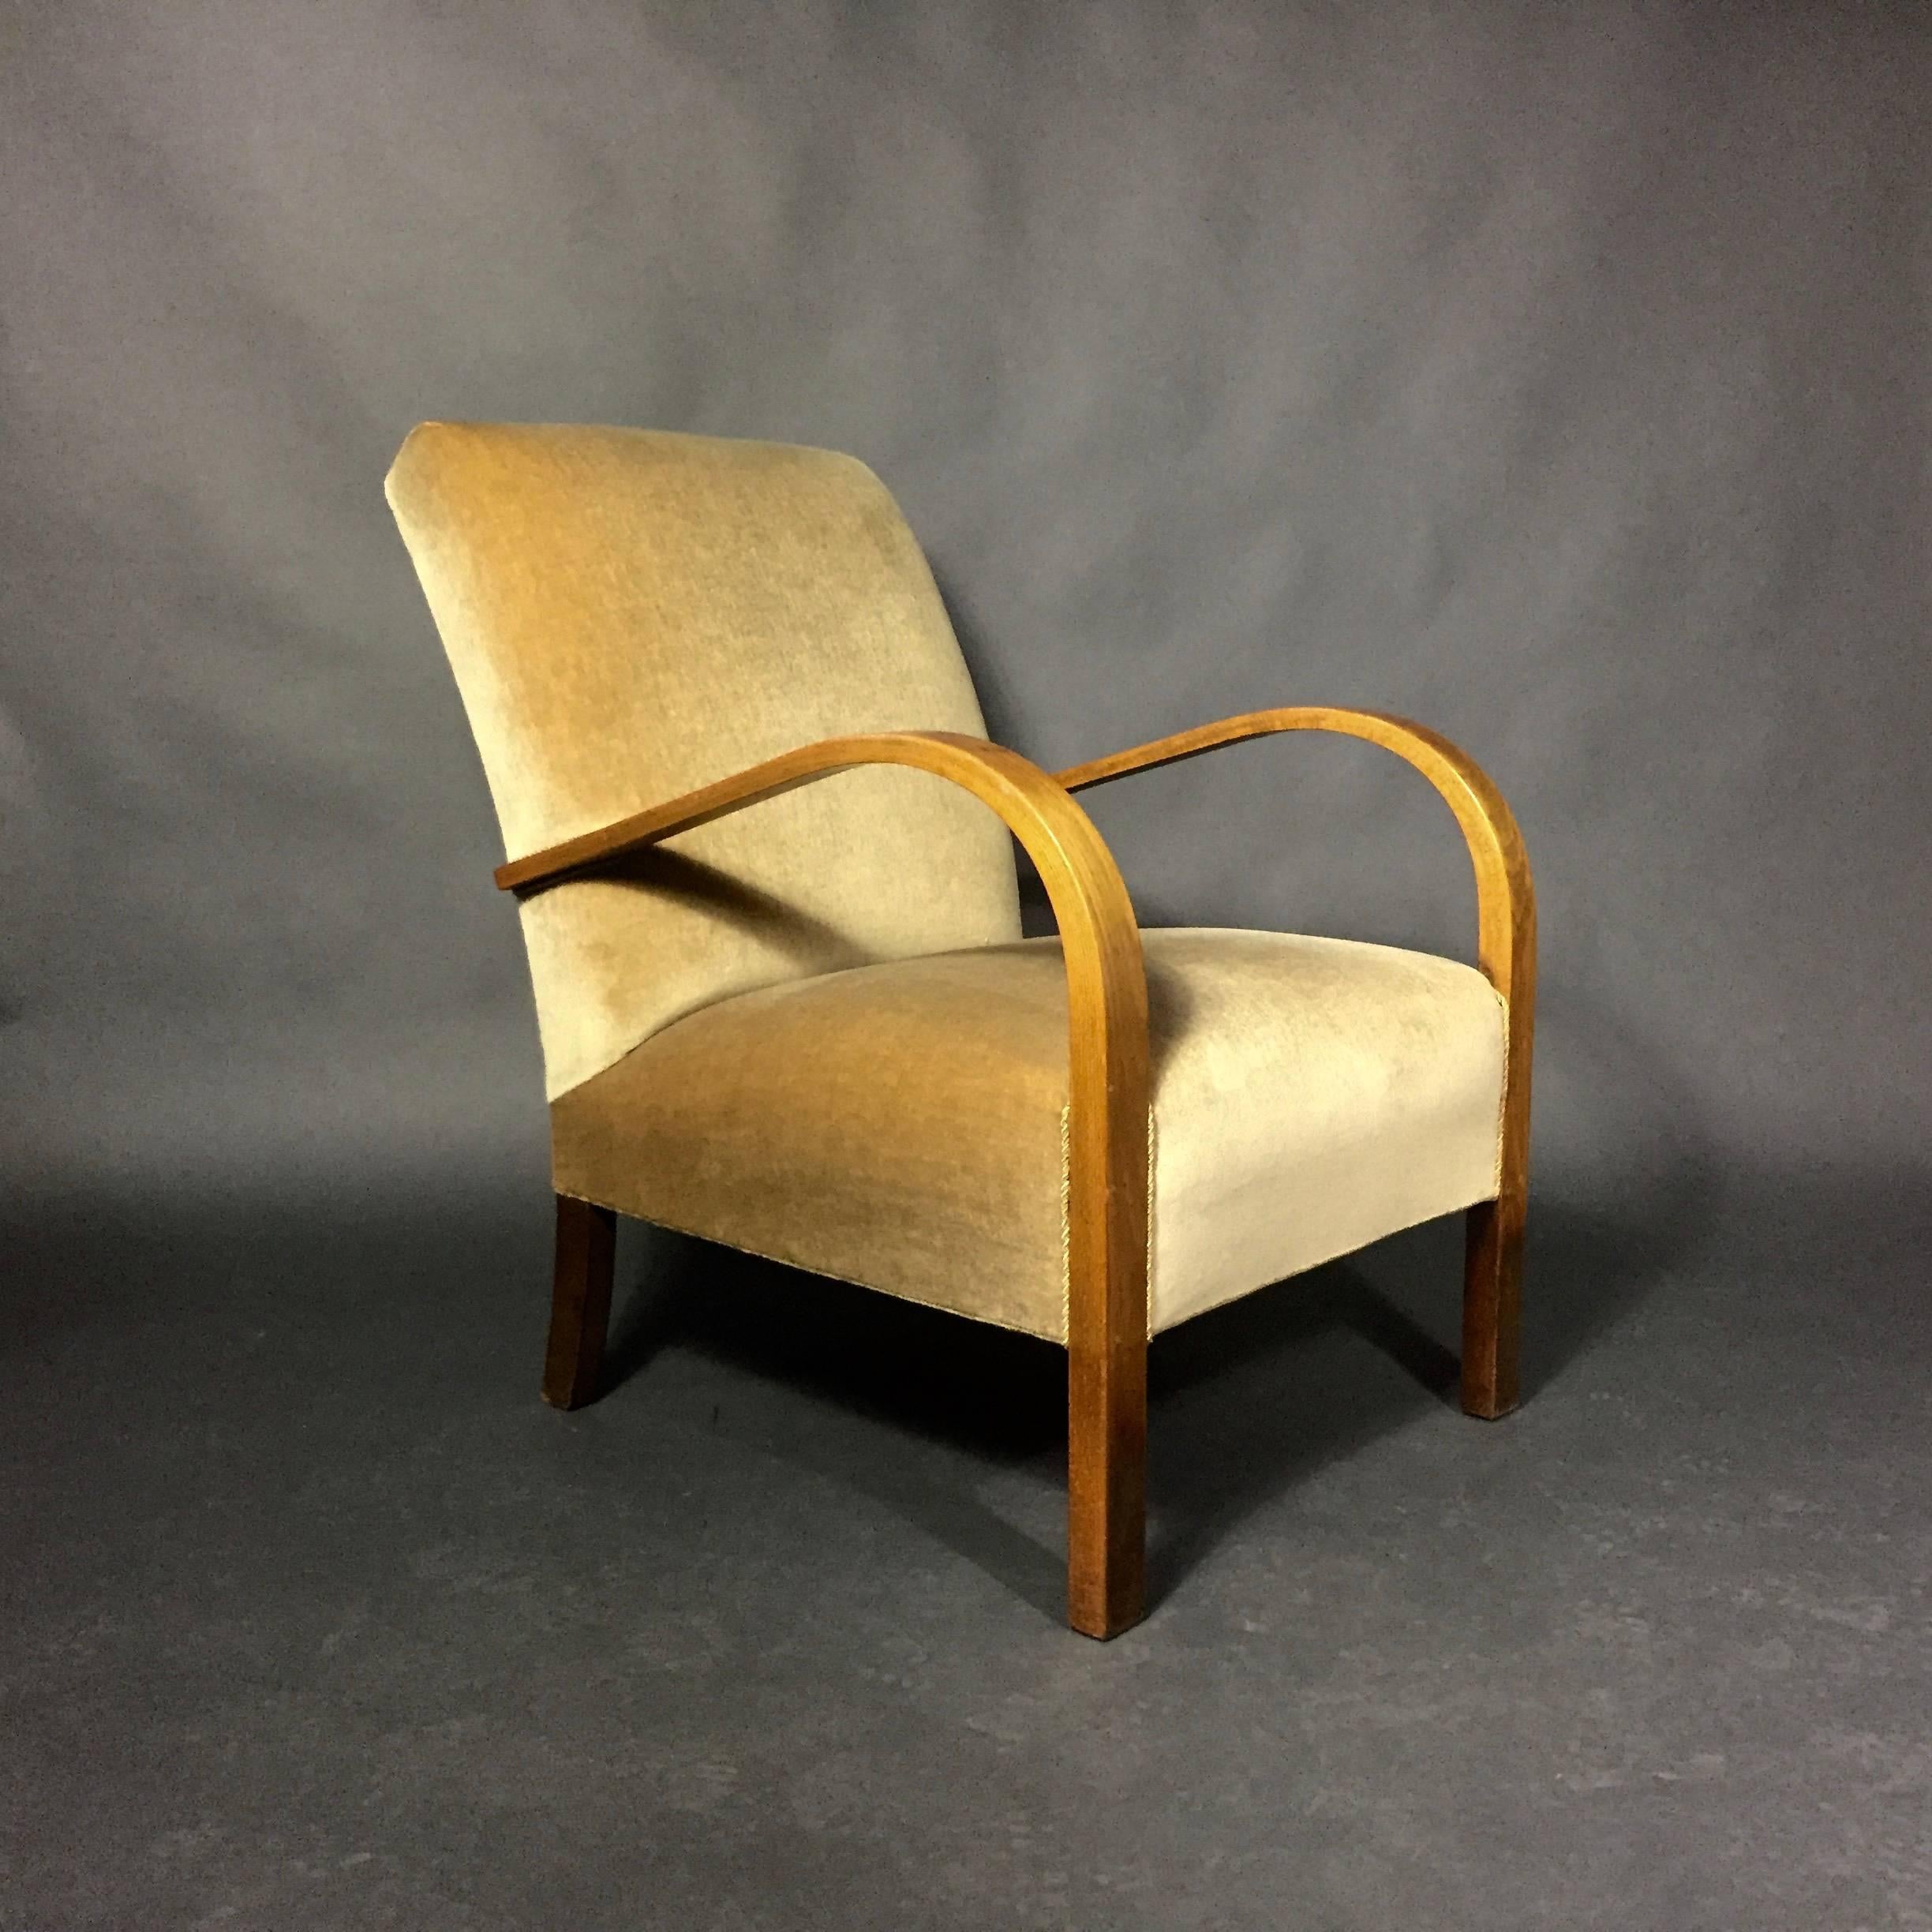 Simplicity of design and a beautifully carved beech arm create a lovely statement for this lounge chair with light camel mohair covers. Solid construction, Danish, 1940s. Some wear and marks to arm - though nicely vintage in presentation.